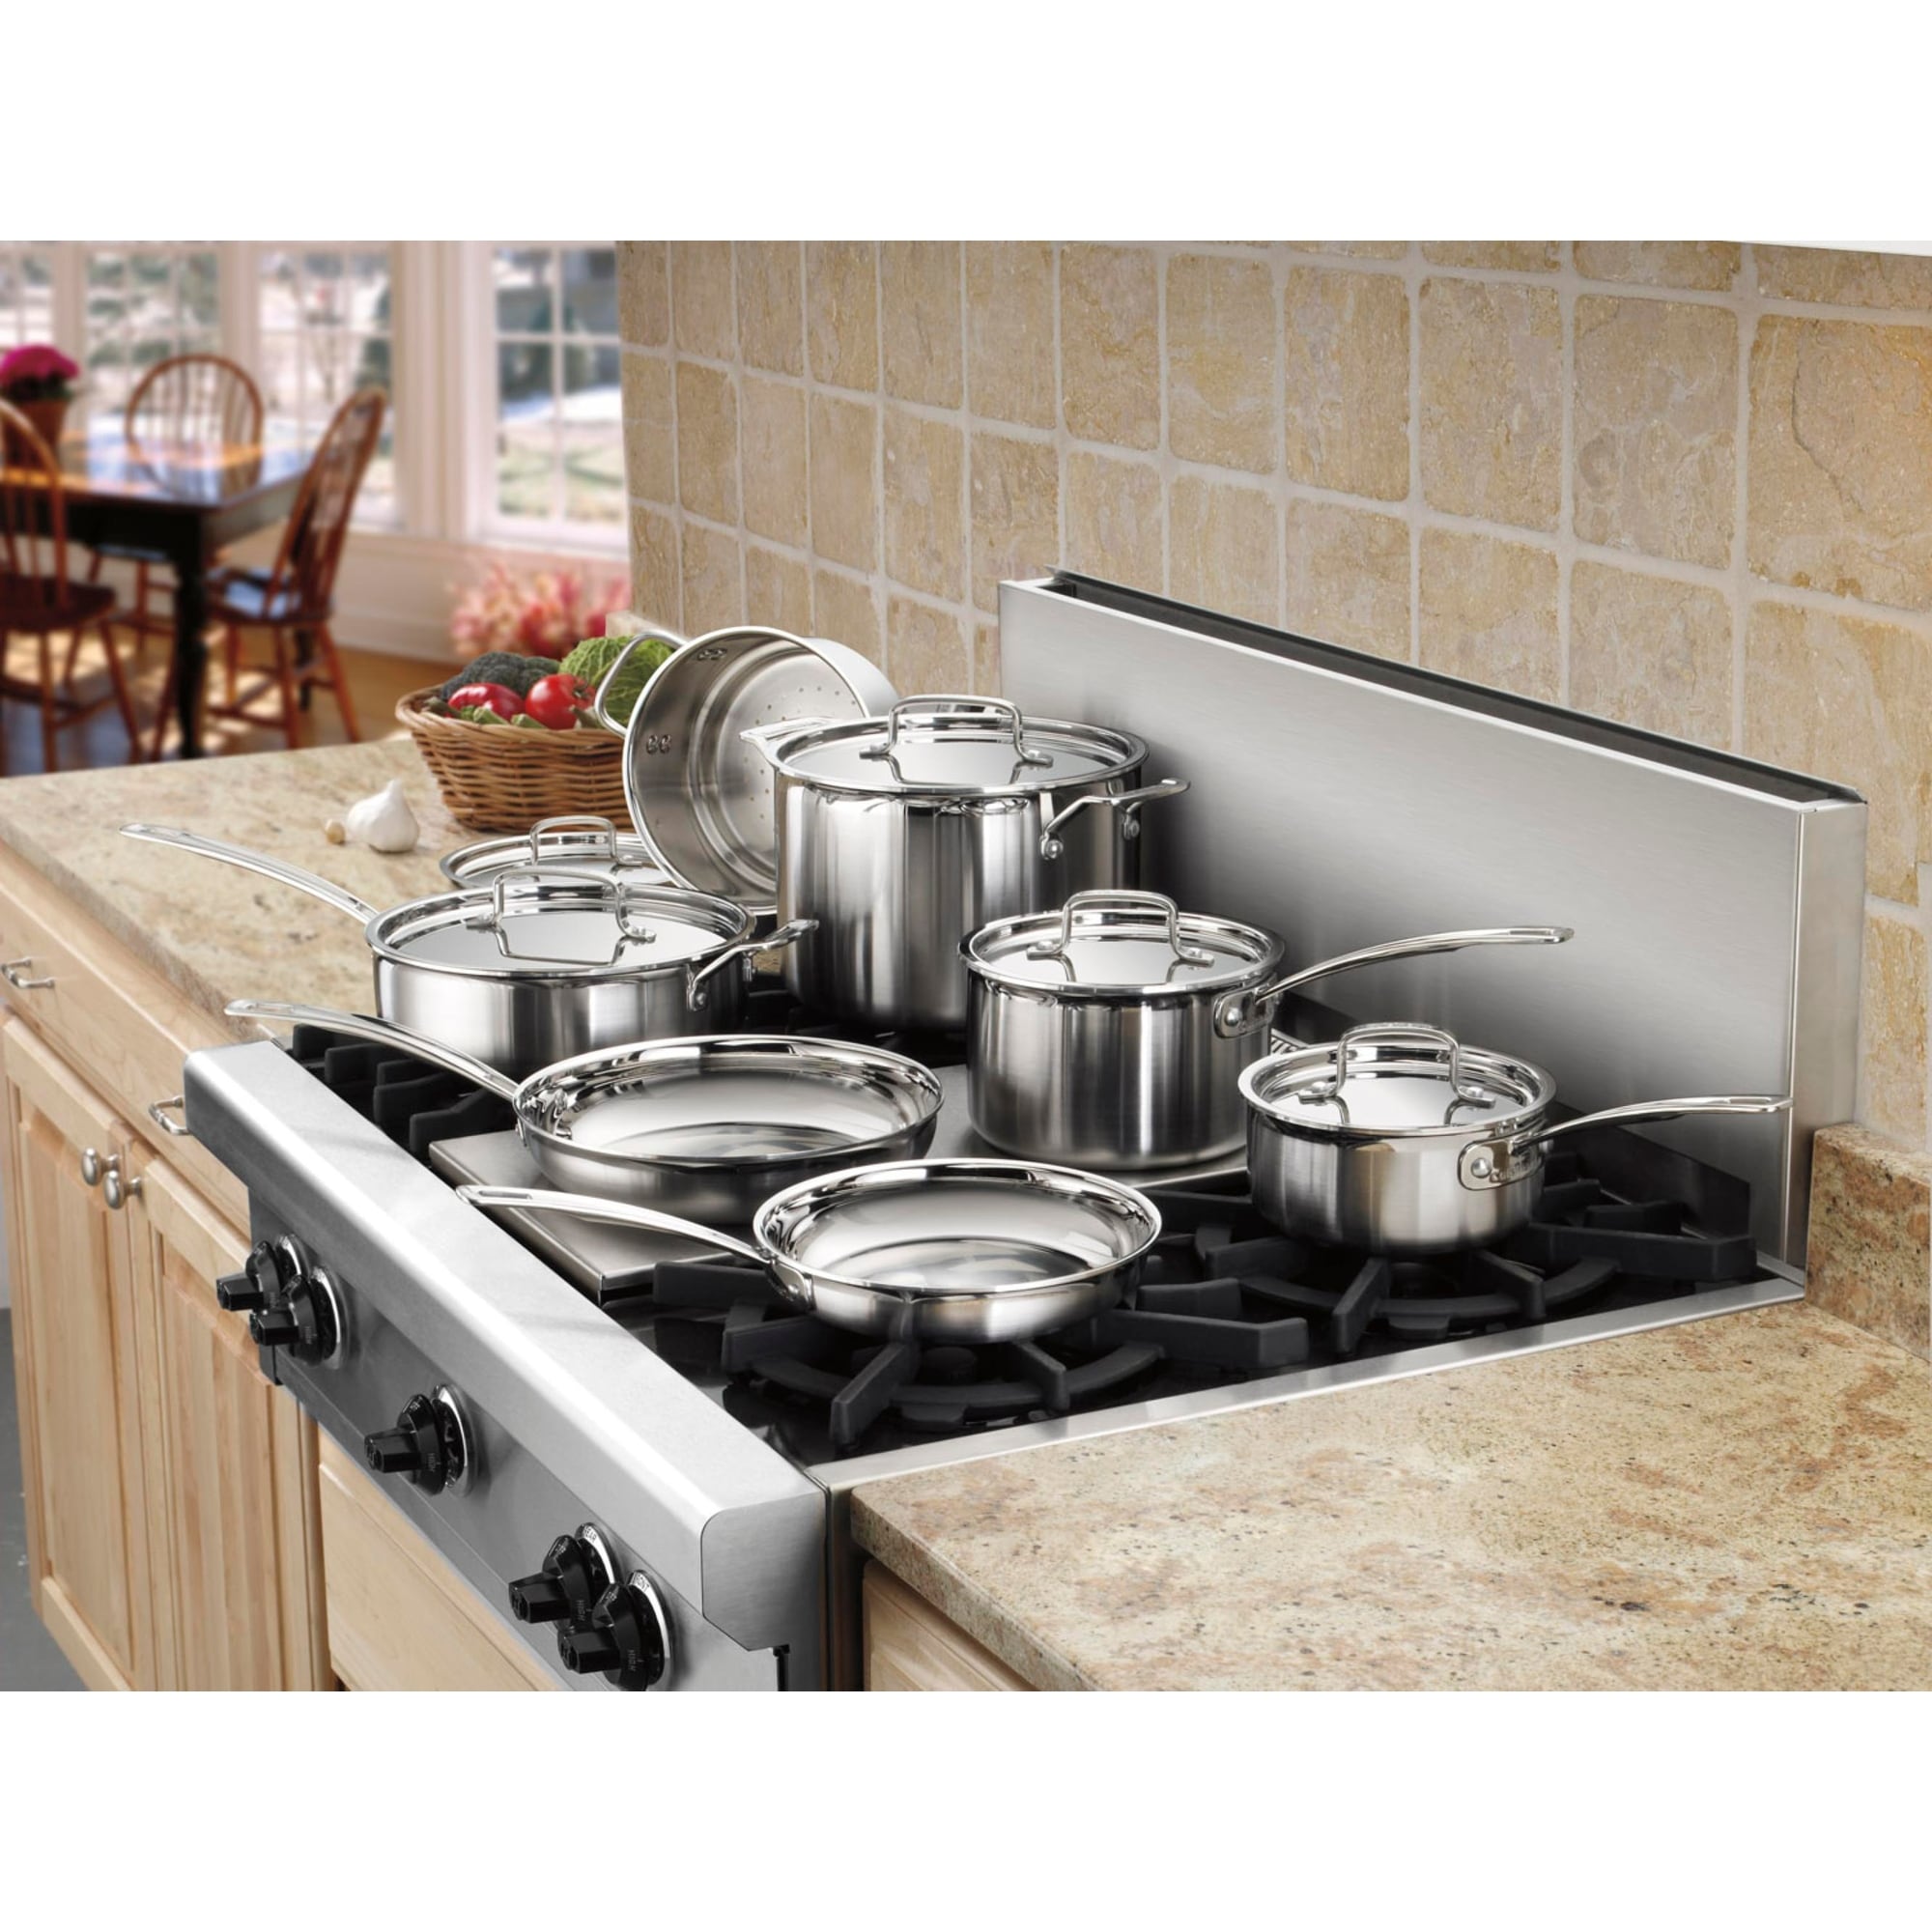 https://ak1.ostkcdn.com/images/products/is/images/direct/0fc7b43a34982980ef1c7430e1b541b921331aaa/Cuisinart-MultiClad-Pro-Triple-Ply-Stainless-Cookware-12-Piece-Set.jpg